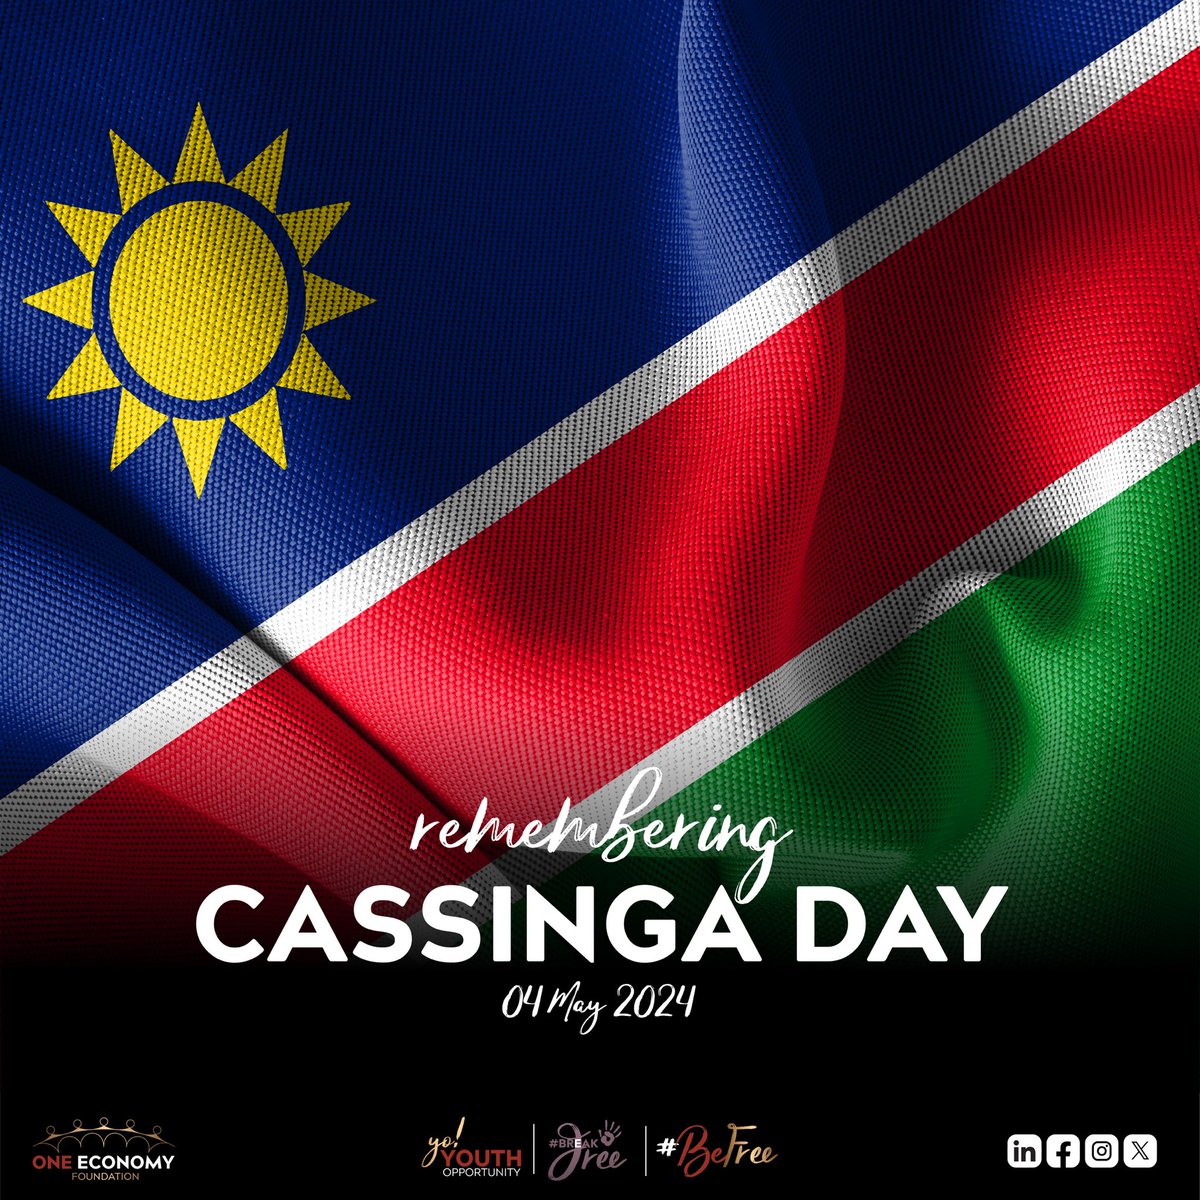 As we remember Cassinga Day, we honour the selfless heroes and heroines who fought for our freedom in a brutal and lengthy battle. May we never forget, and may their strength and resilience live in us all. Let us dedicate our lives to honouring their efforts. #CassingaDay